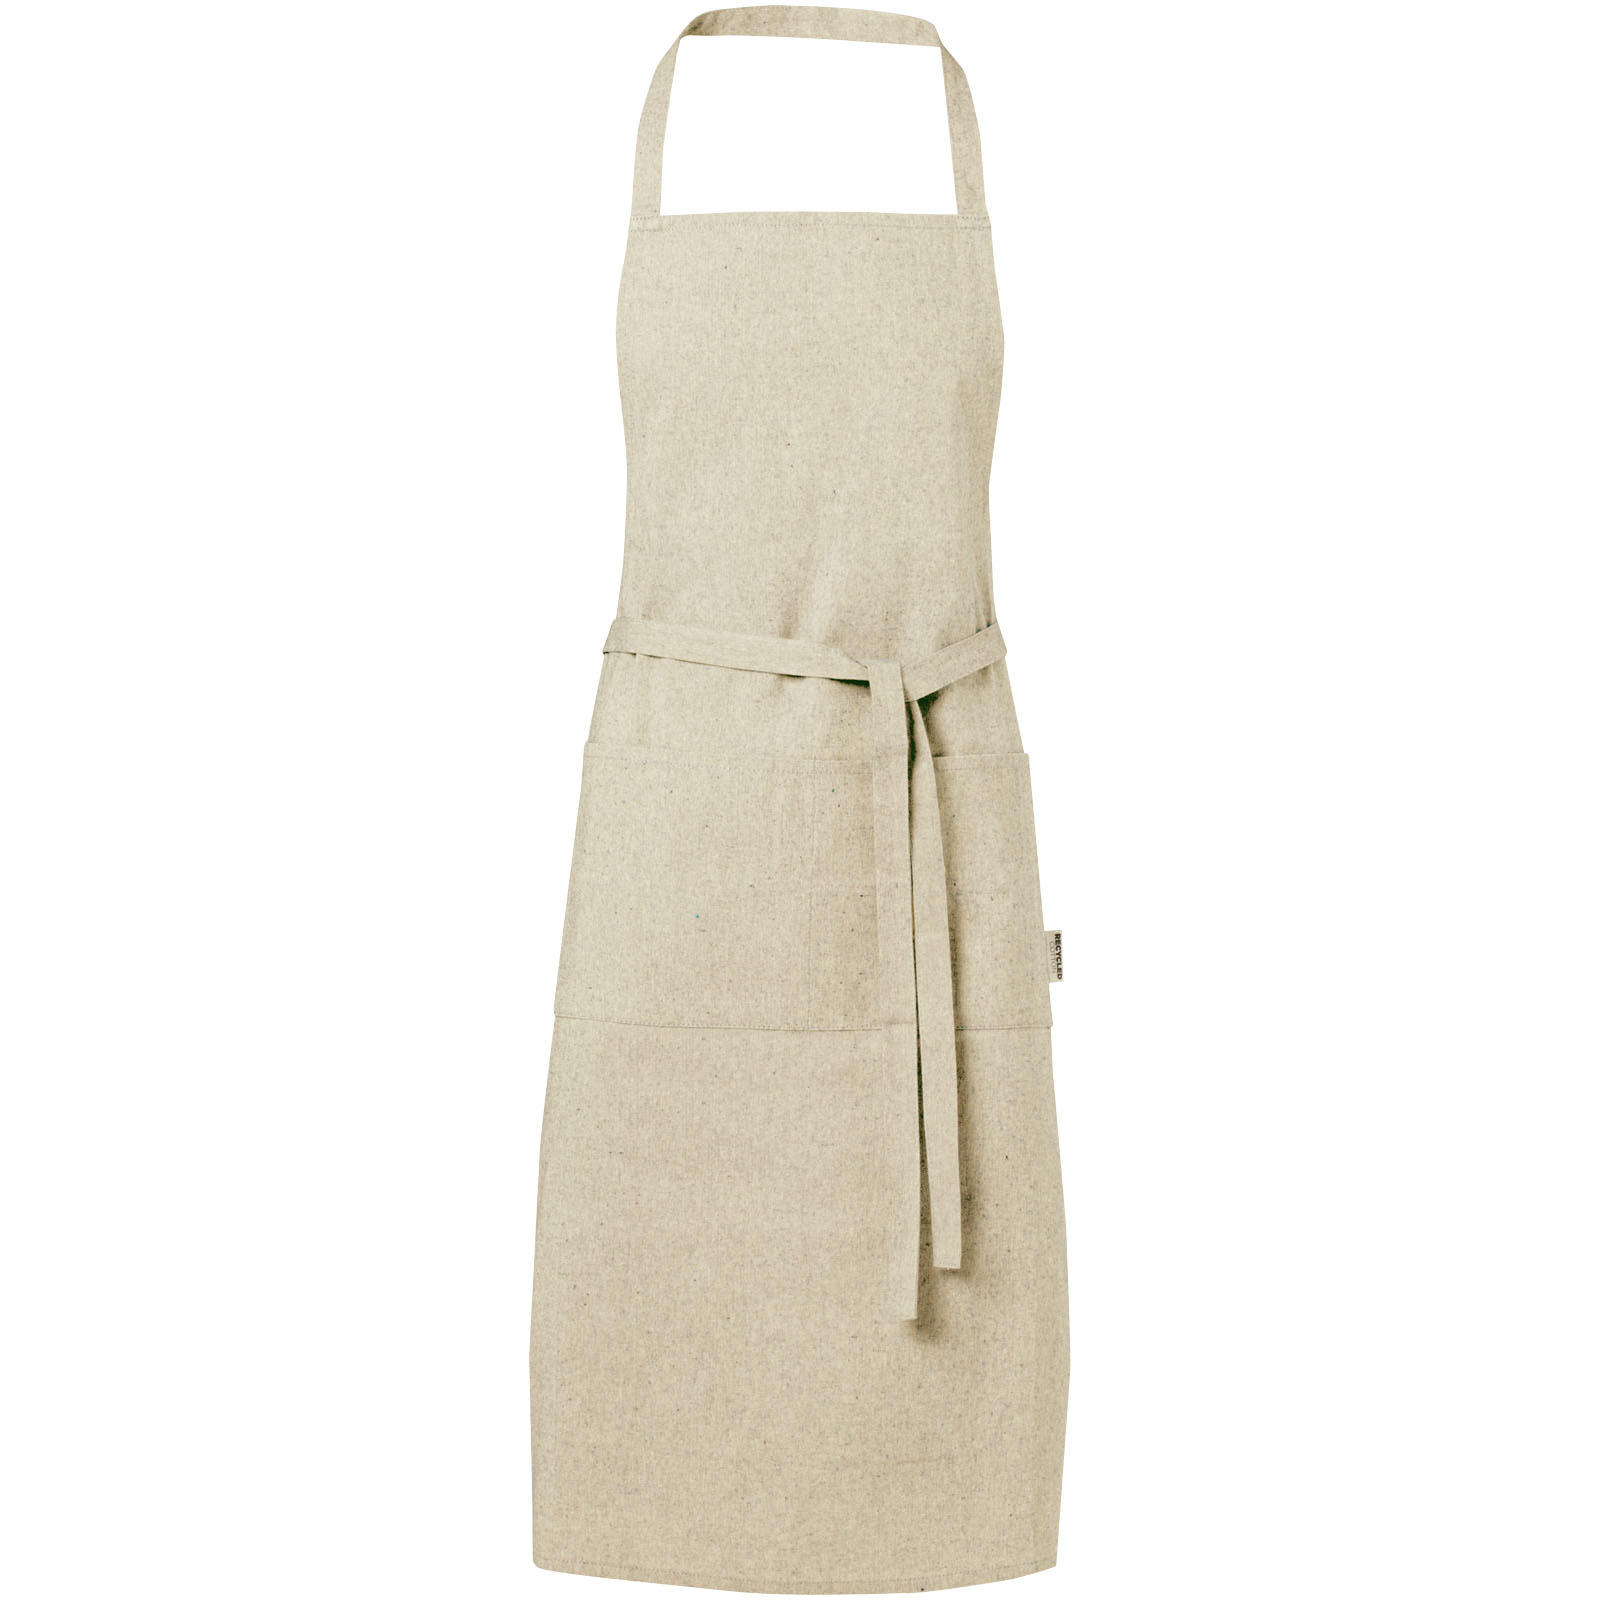 Aprons - Pheebs 200 g/m² recycled cotton apron